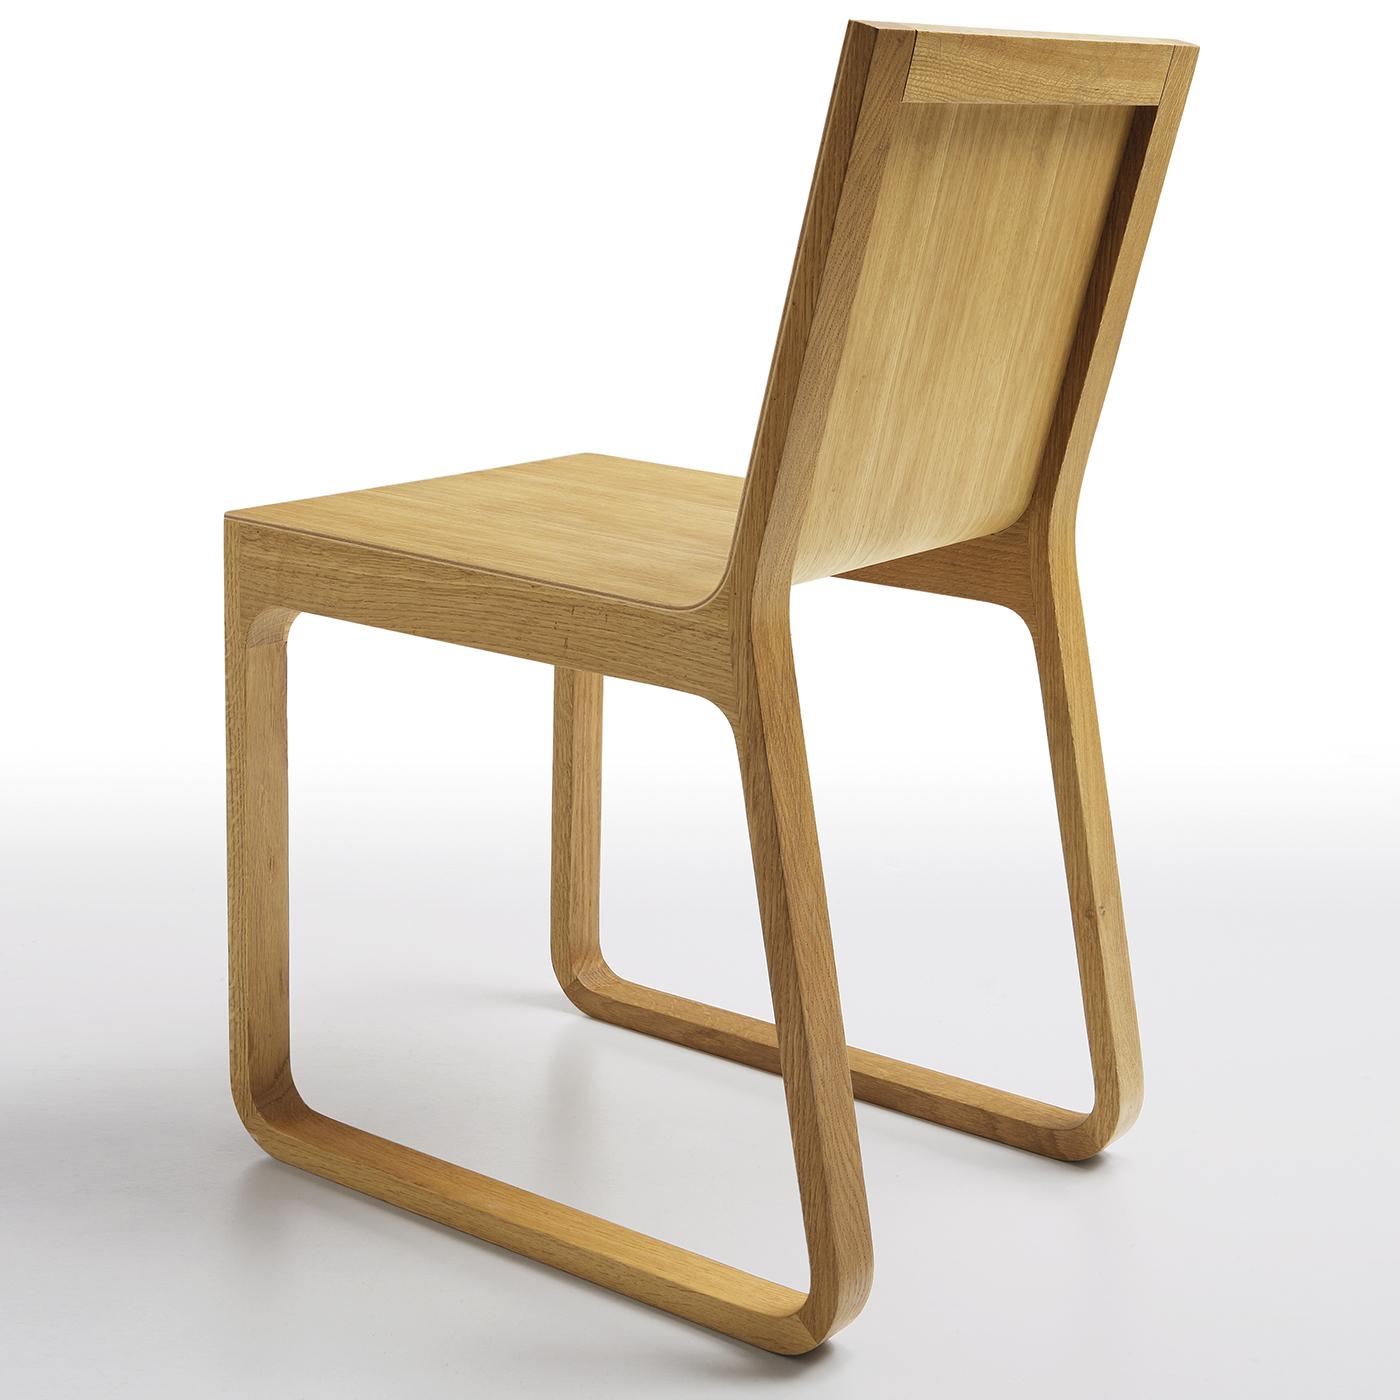 Designed by Finnish designer Harri Koskinen, who won the prestigious Compass d'ora award in 2004 with this piece, the Muu chair is a stunning example of the subtle elegance of Scandinavian style. The open structure of this exquisite piece of